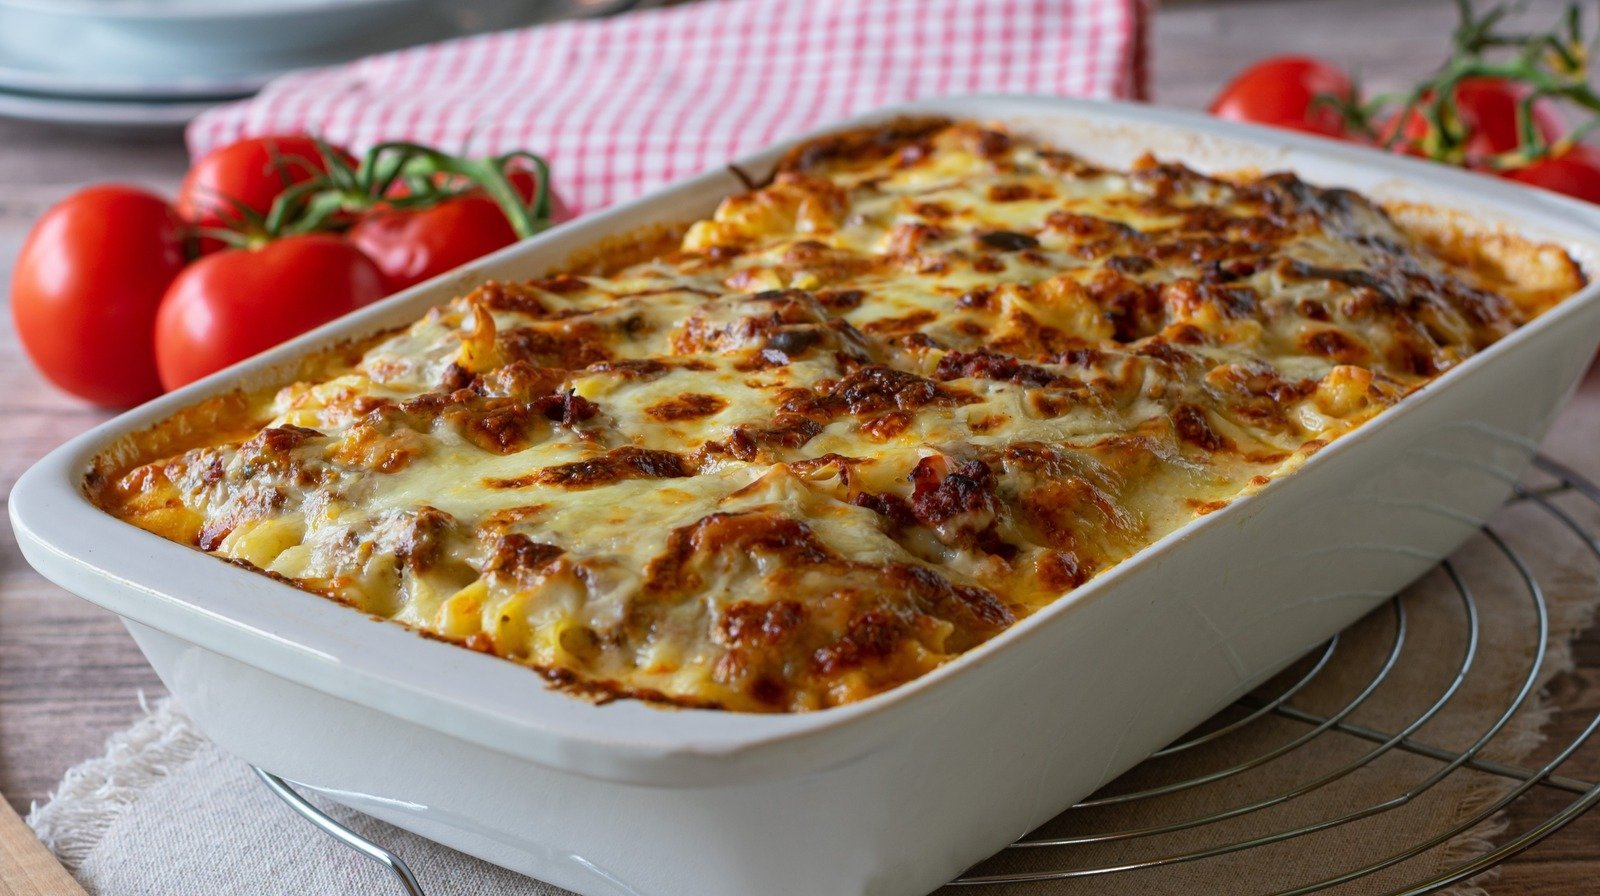 12 Mistakes Everyone Makes When Making A Casserole